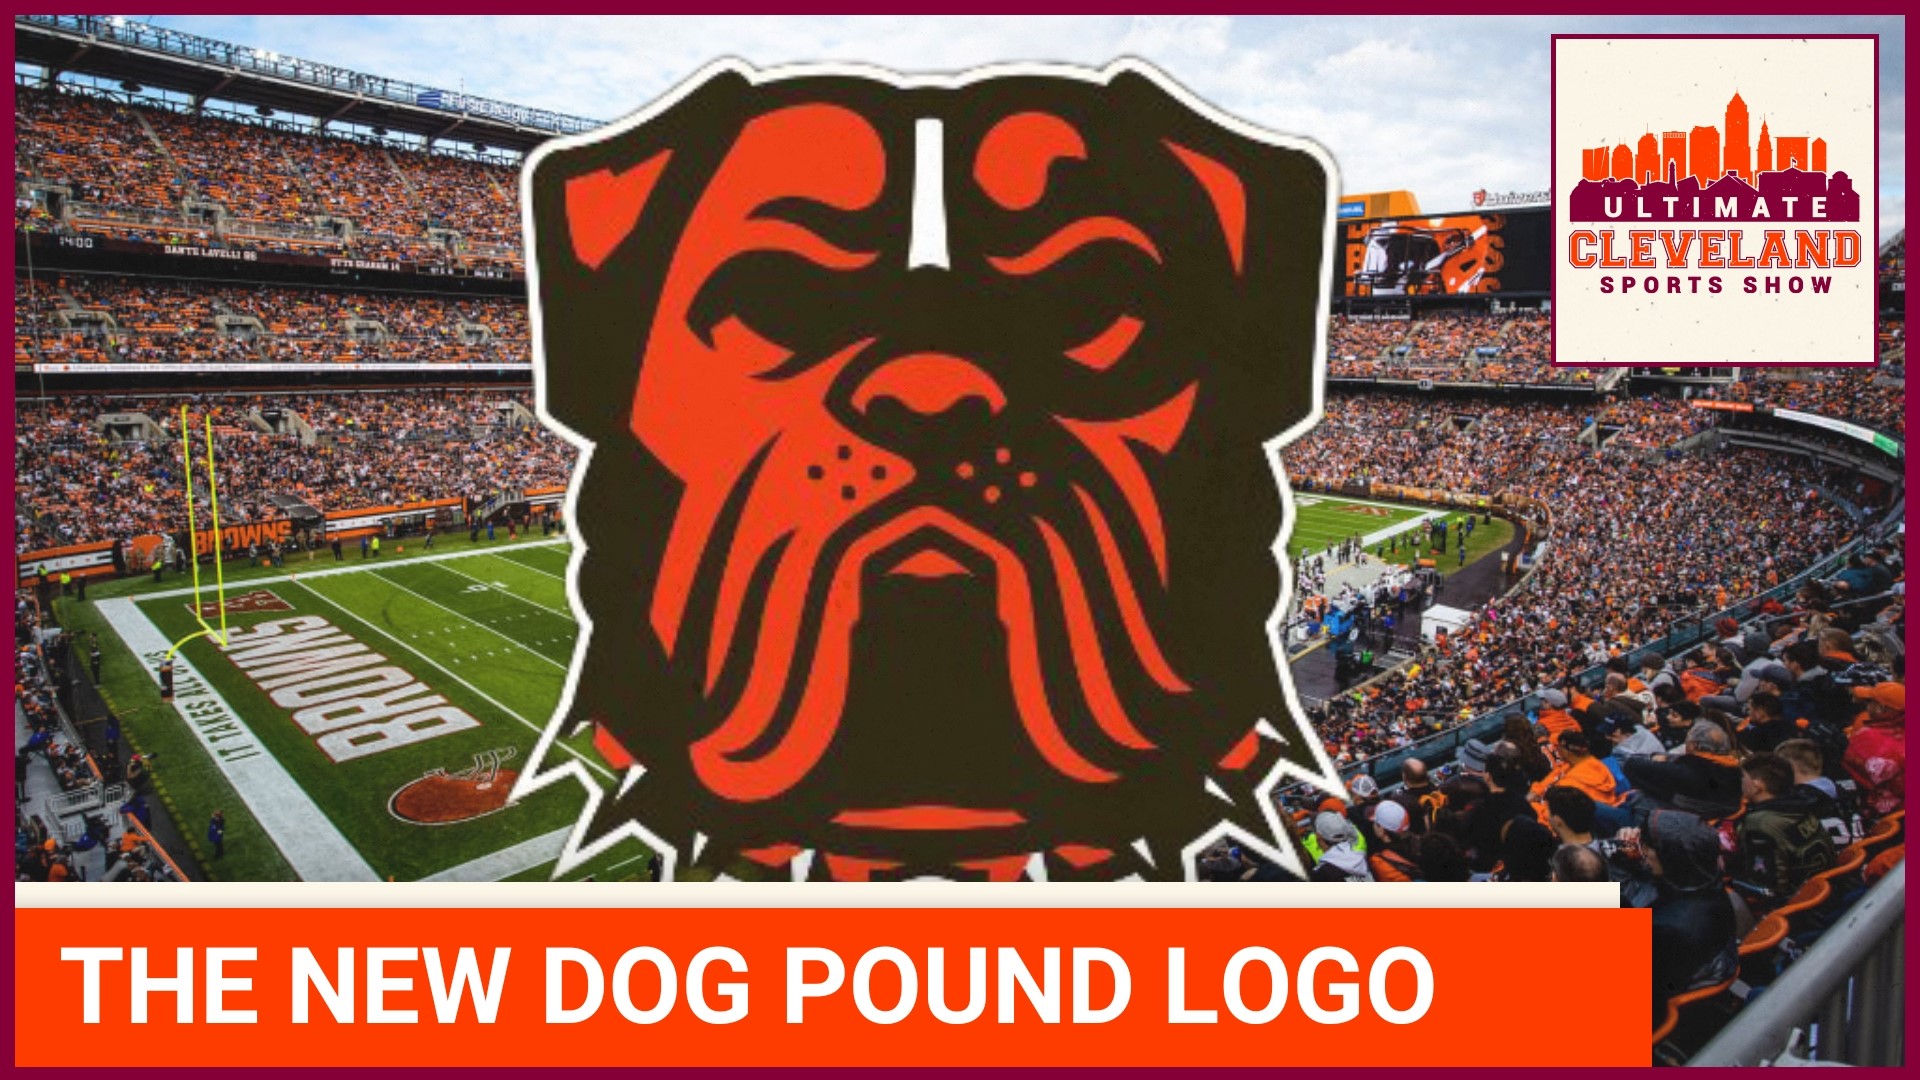 The Cleveland Browns have a new logo created by graphic designer Houston Mark who joins the UCSS panel.